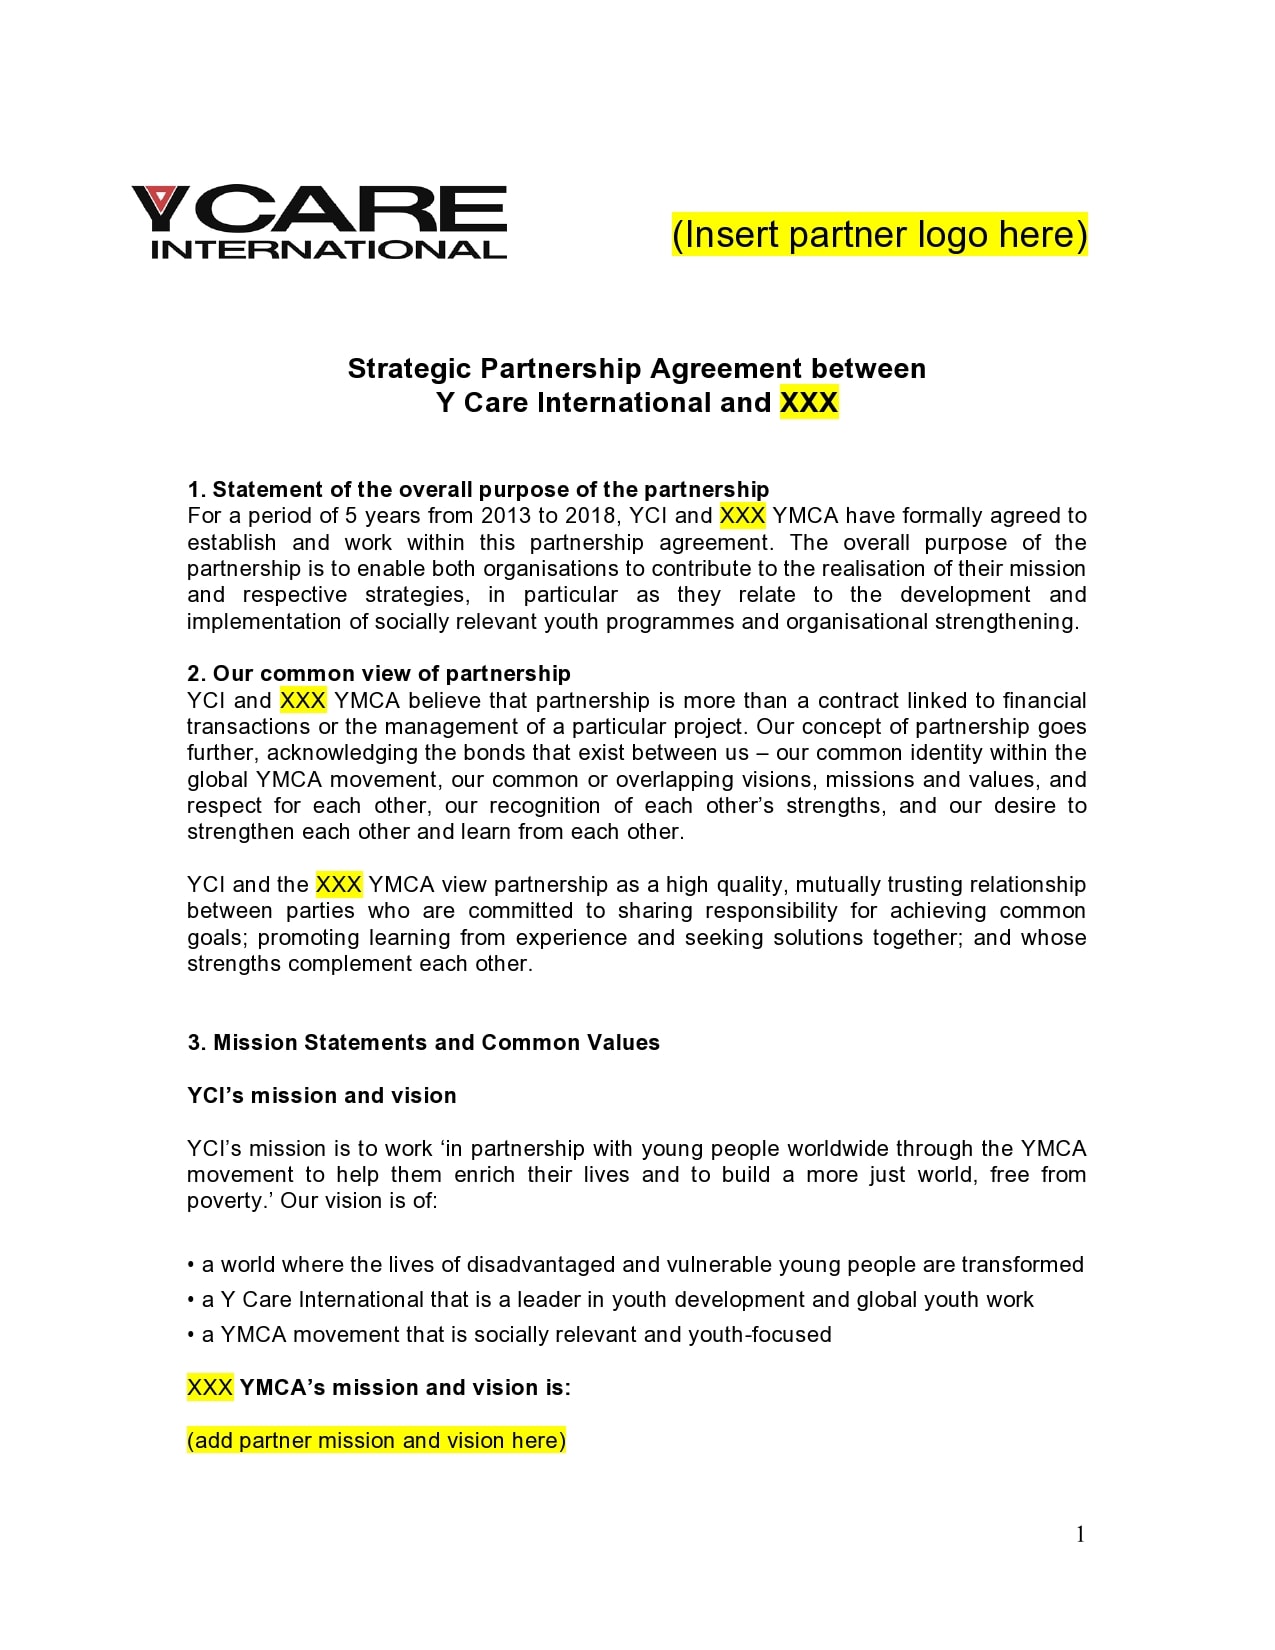 21 Partnership Agreement Templates (Business, Real Estate) Within brand partnership agreement template